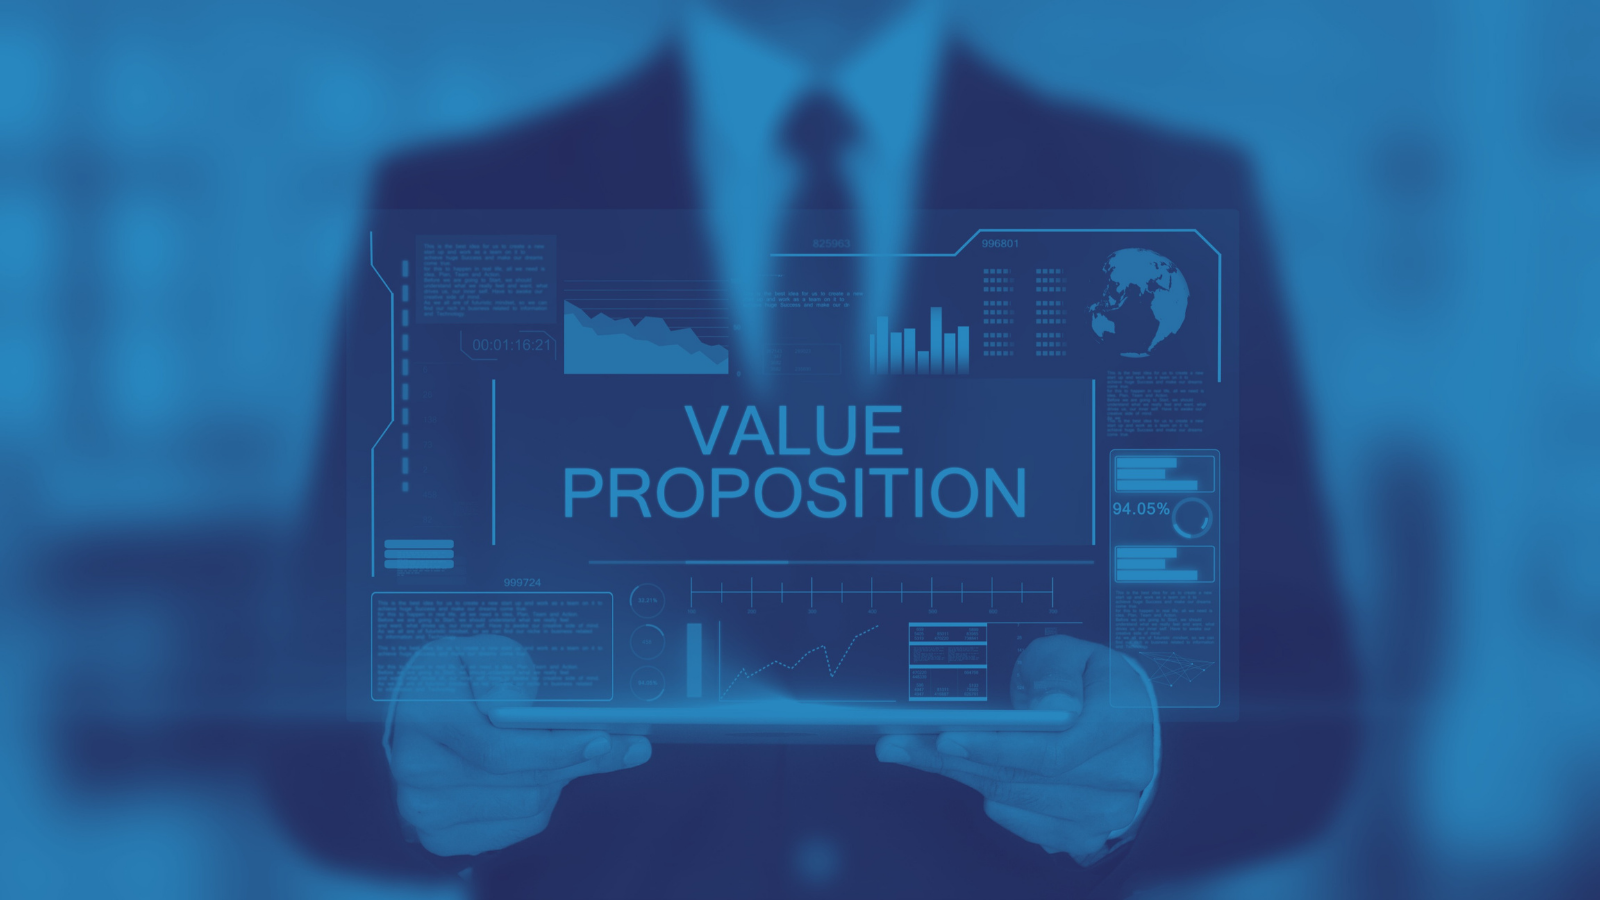  Develop and deploy a differentiating and compelling value proposition and sales stories that will improve pipeline and new account conversion. 